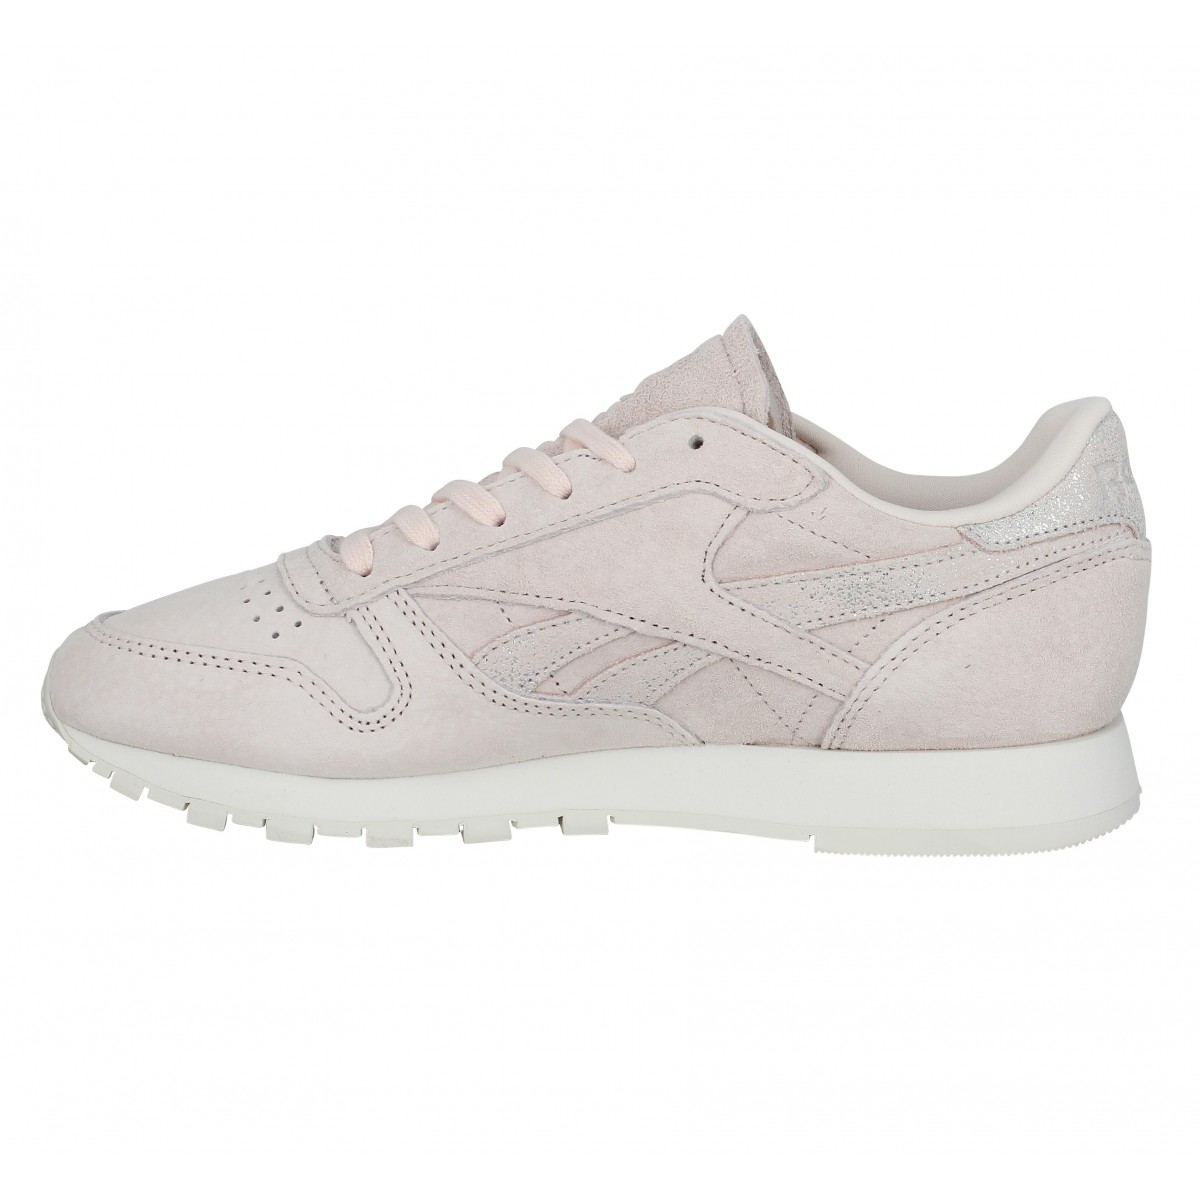 reebok classic leather femme rose pale